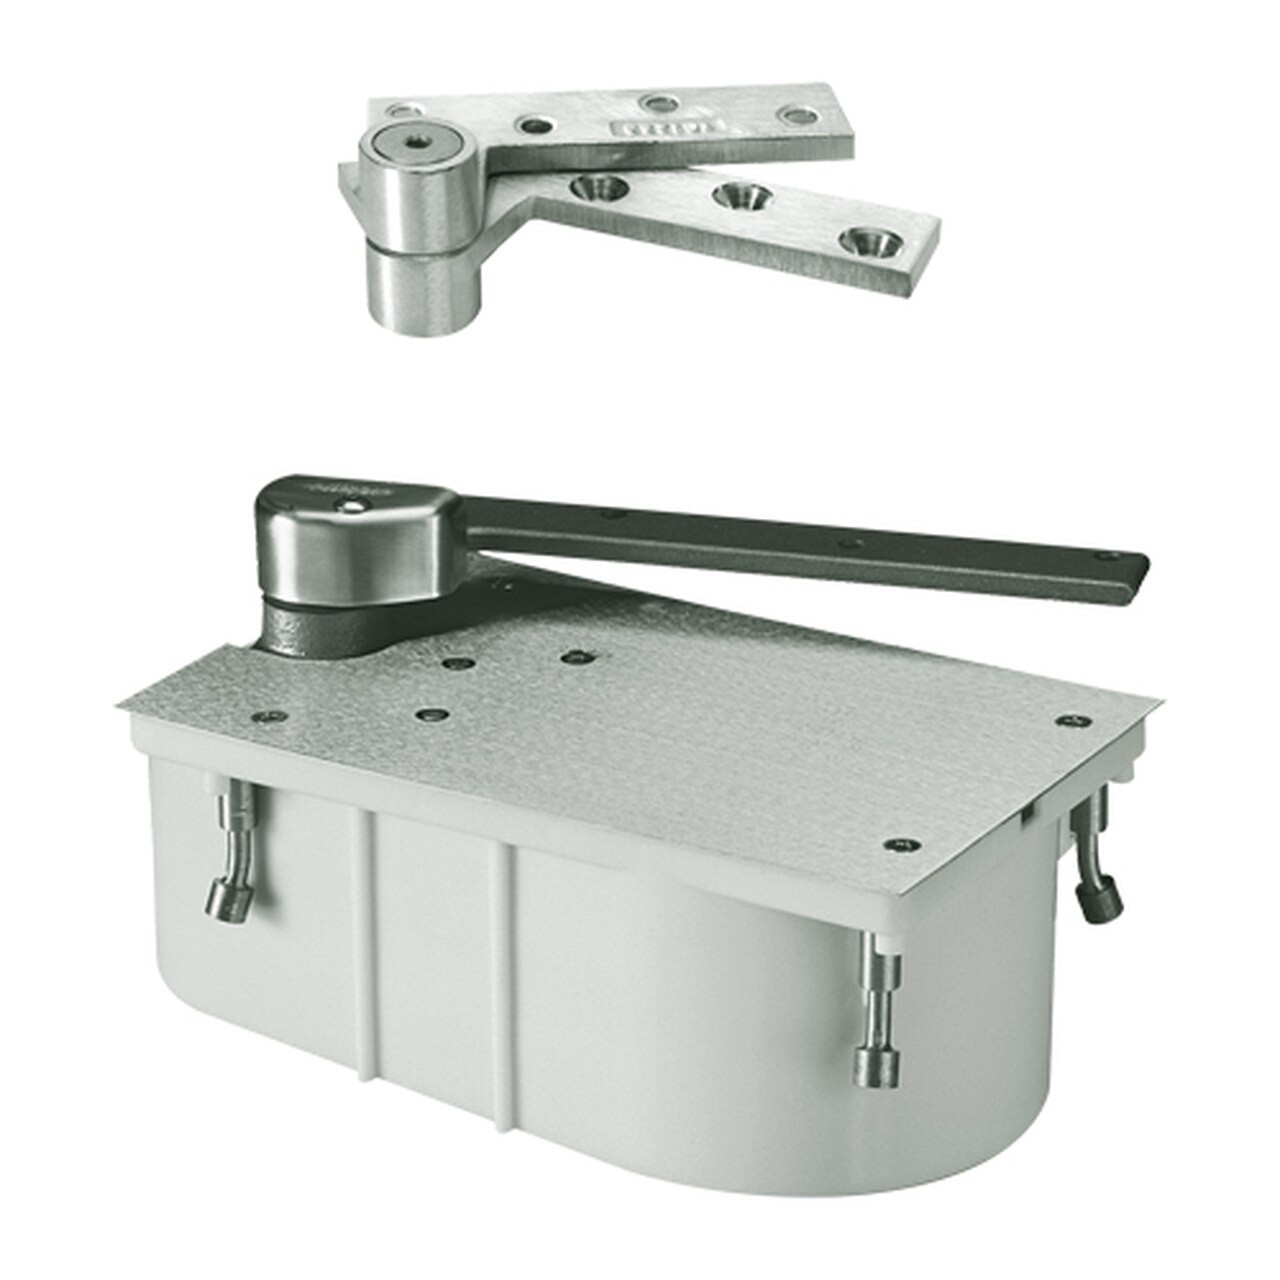 F27-105N-LFP-LCC-LH-619 Rixson 27 Series Fire Rated Heavy Duty 3/4" Offset Hung Floor Closer in Satin Nickel Finish